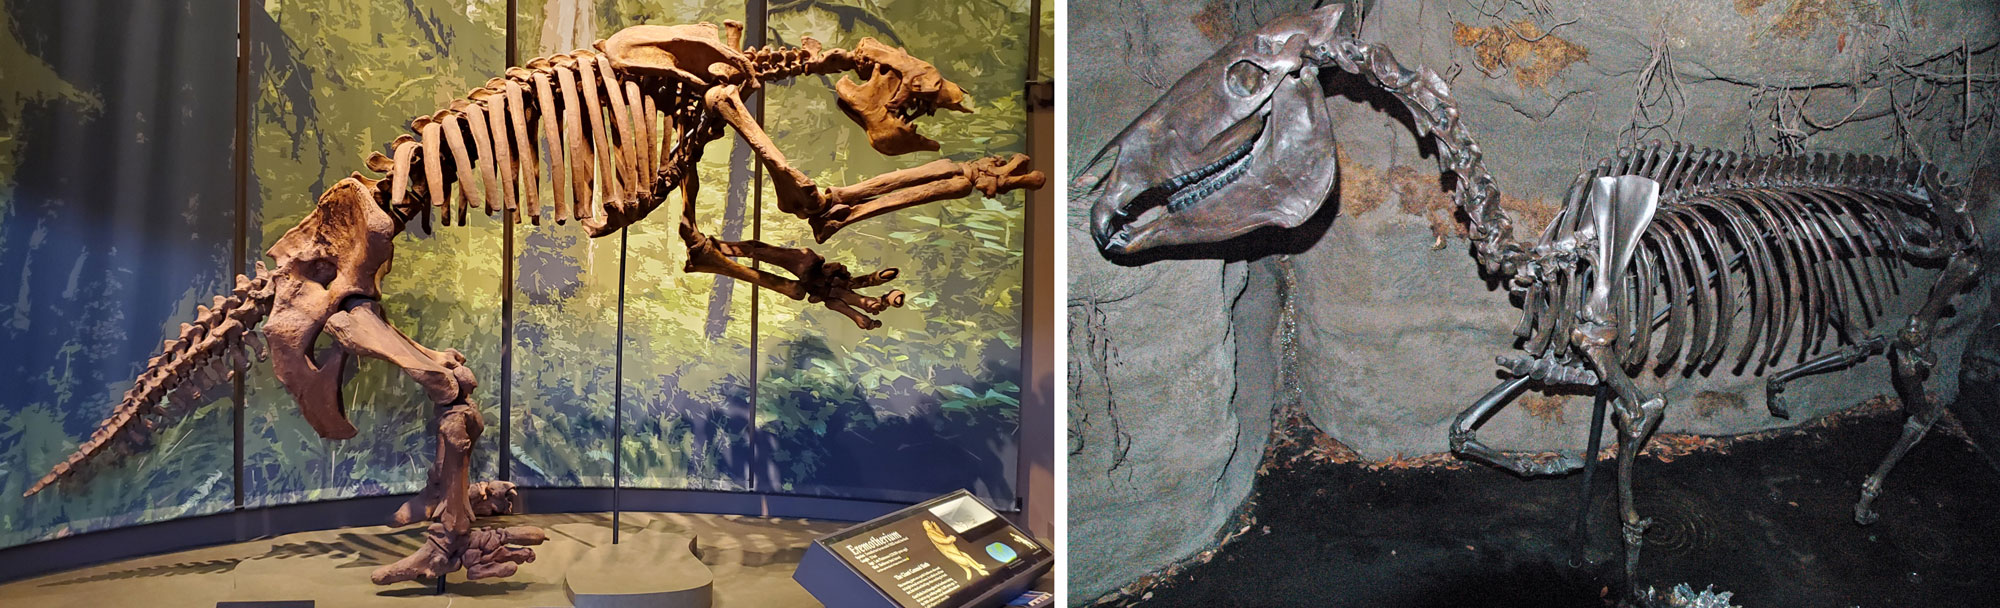 2-Panel figure. Panel 1: Mounted skeleton cast of a large ground sloth from Daytona Beach, Florida. Panel 2: Mounted cast of a skeleton of a horse from Leisey Shell Pit, Florida. Both skeletons are from the Pleistocene.